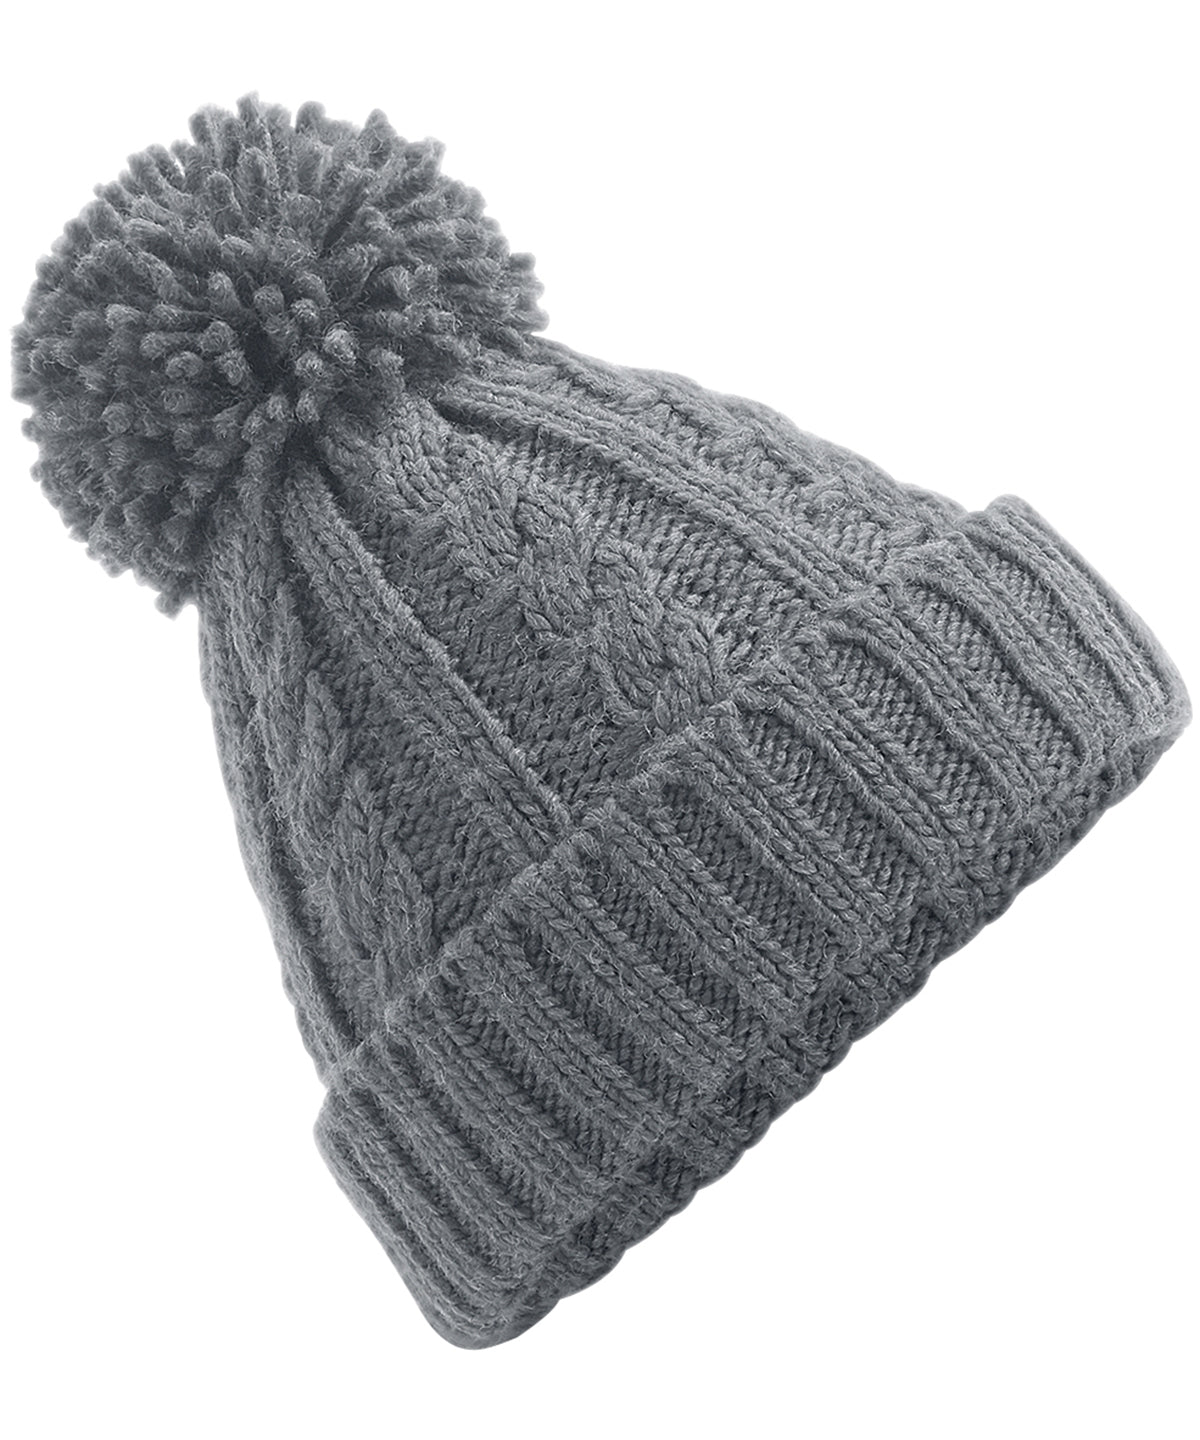 Personalised Hats - Light Grey Beechfield Cable knit melange beanie